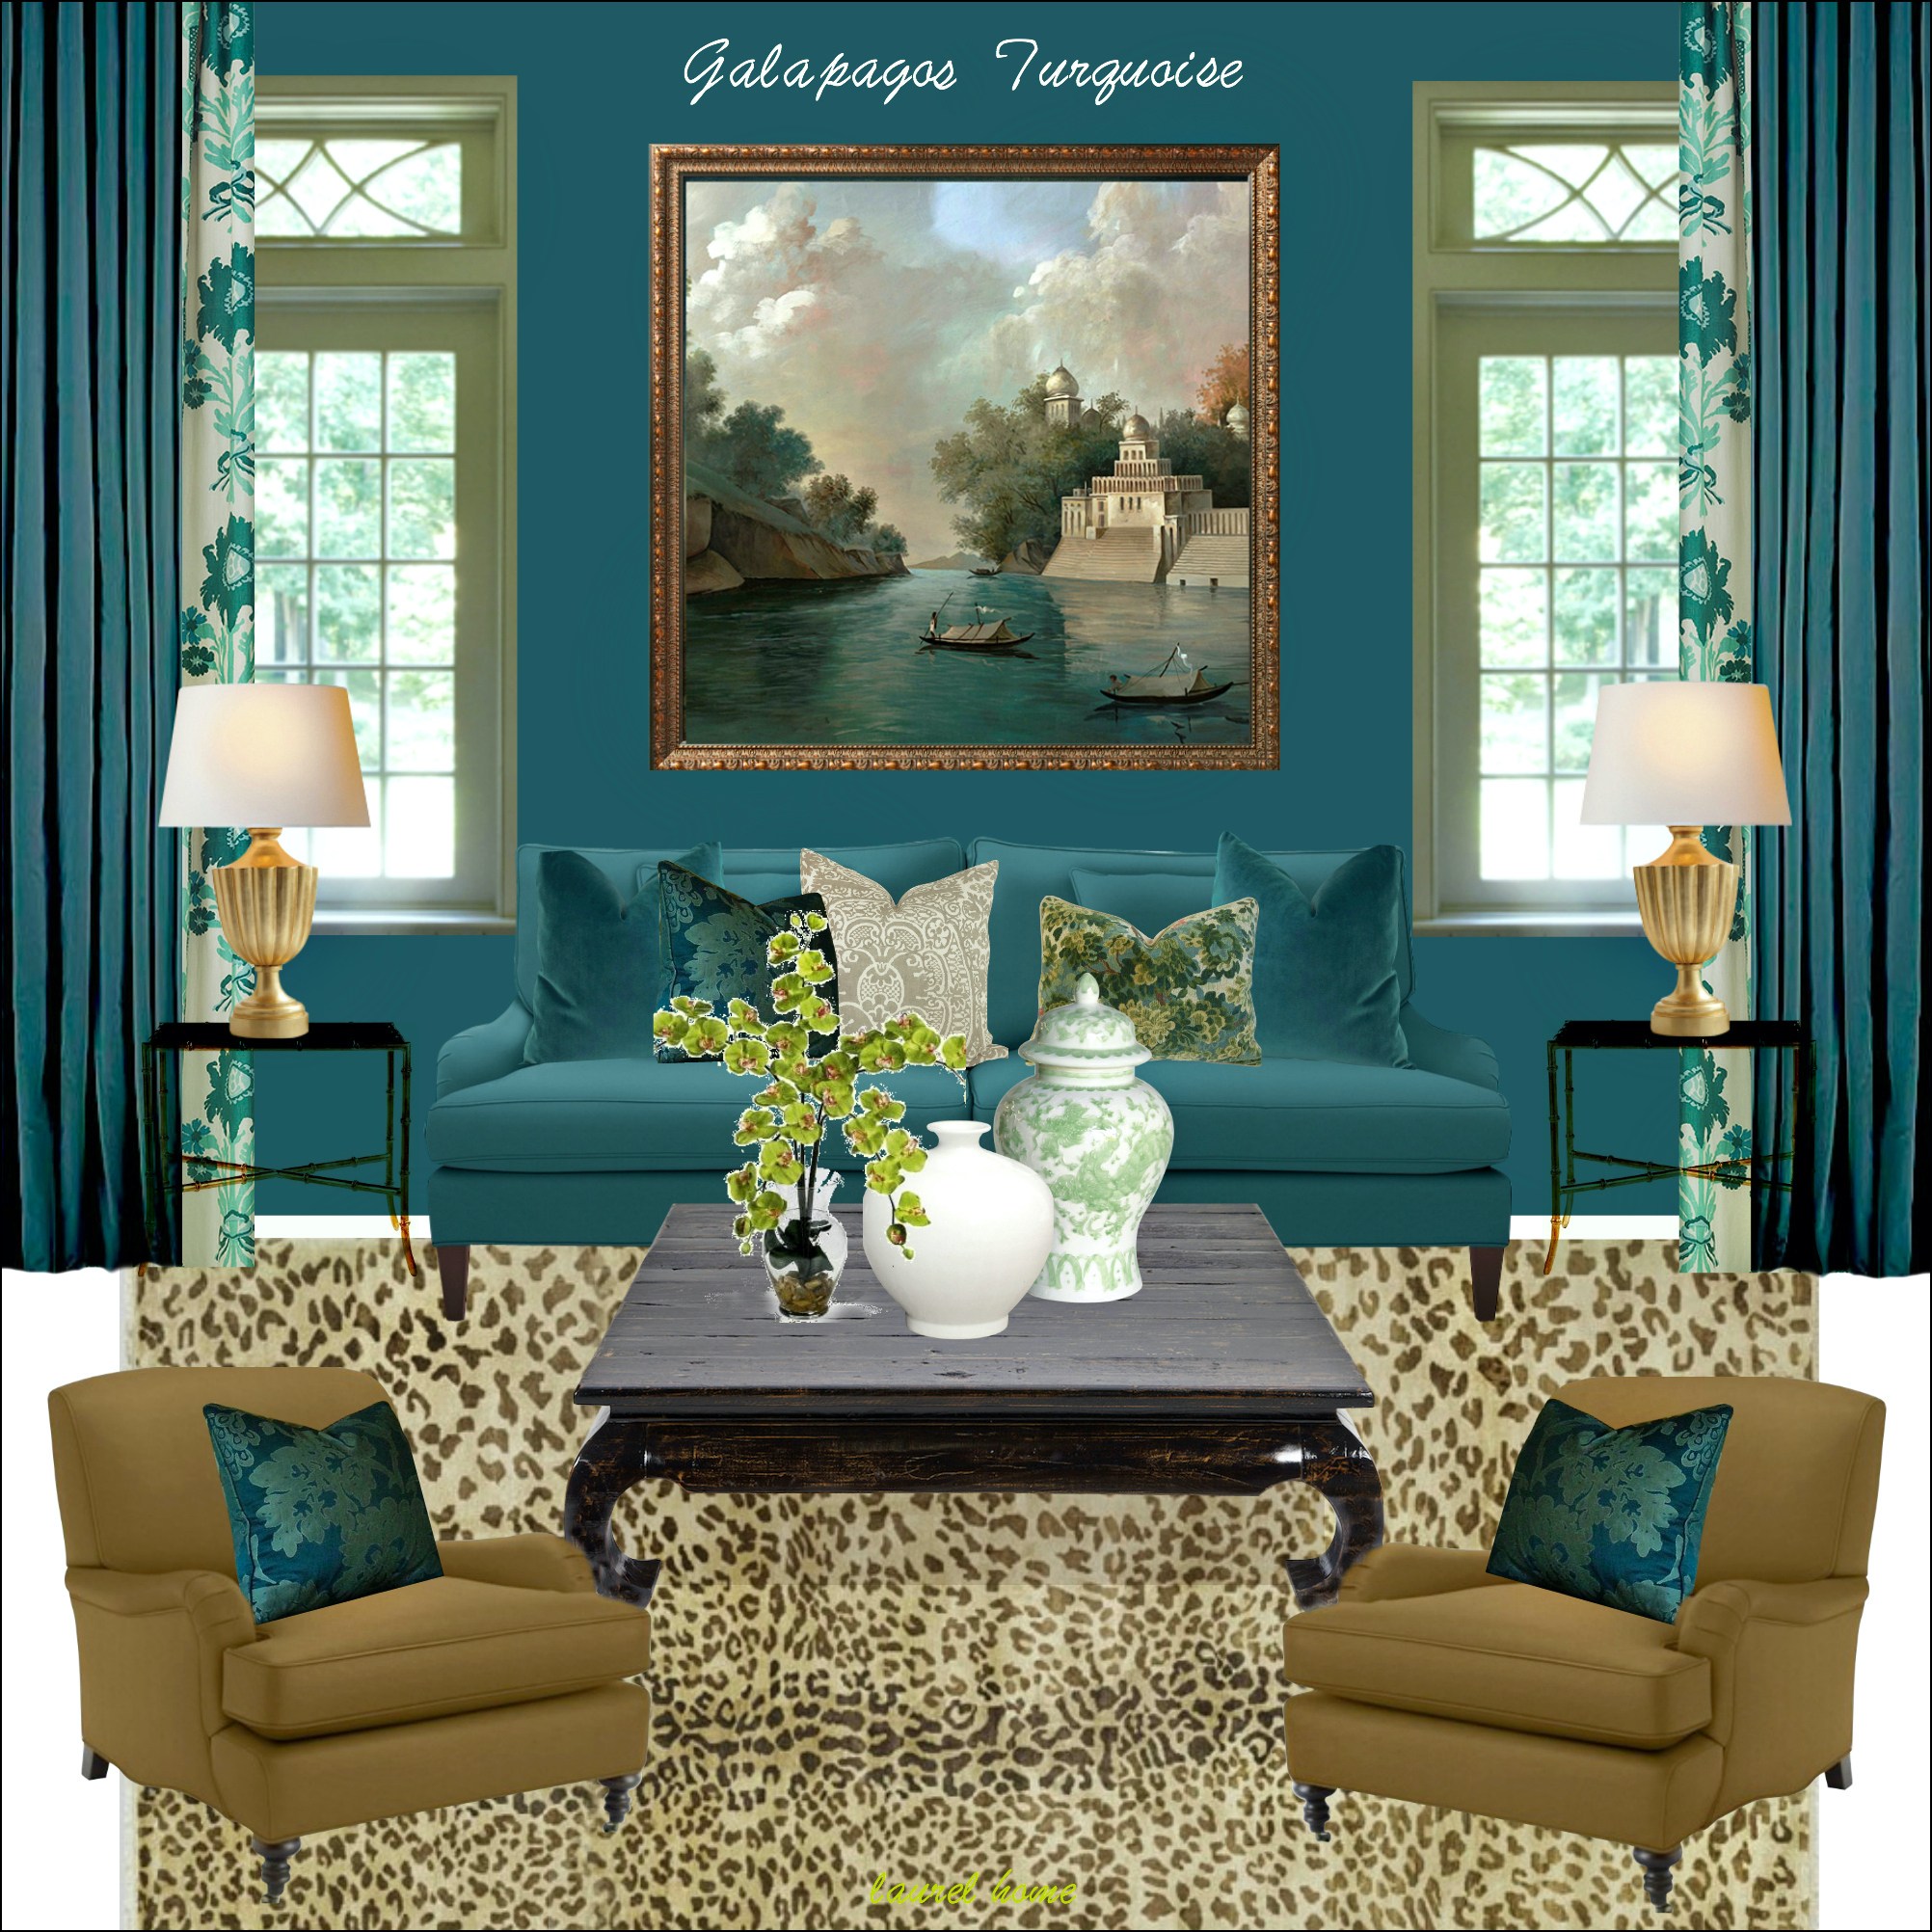 galapagos turquoise living room - saturated teal wall colors